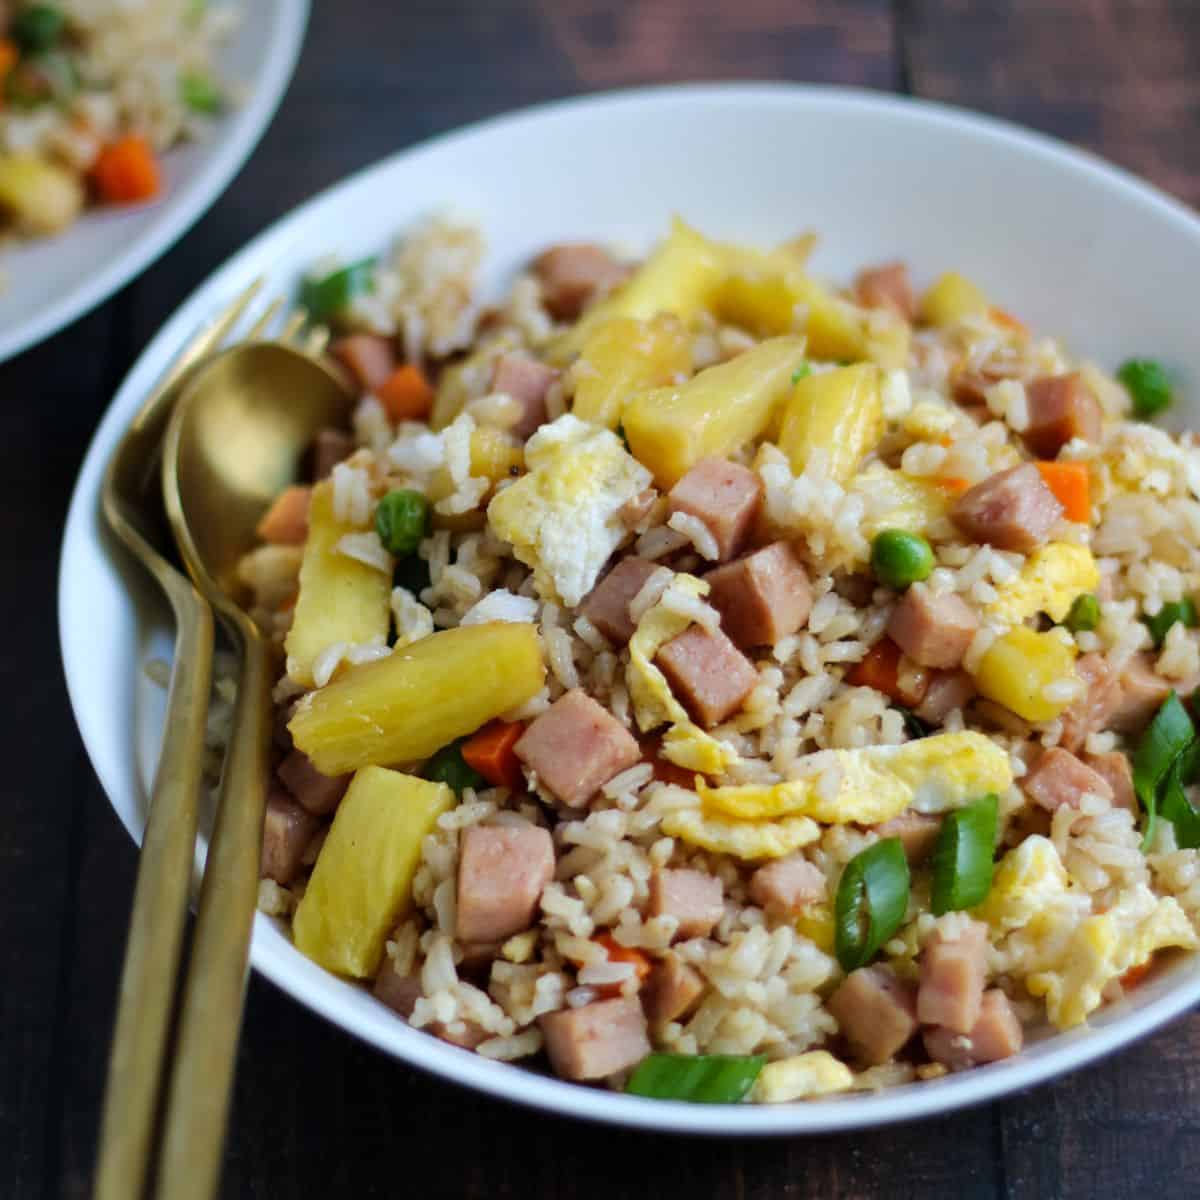 Finish dish of fried rice with spam and pineapple.